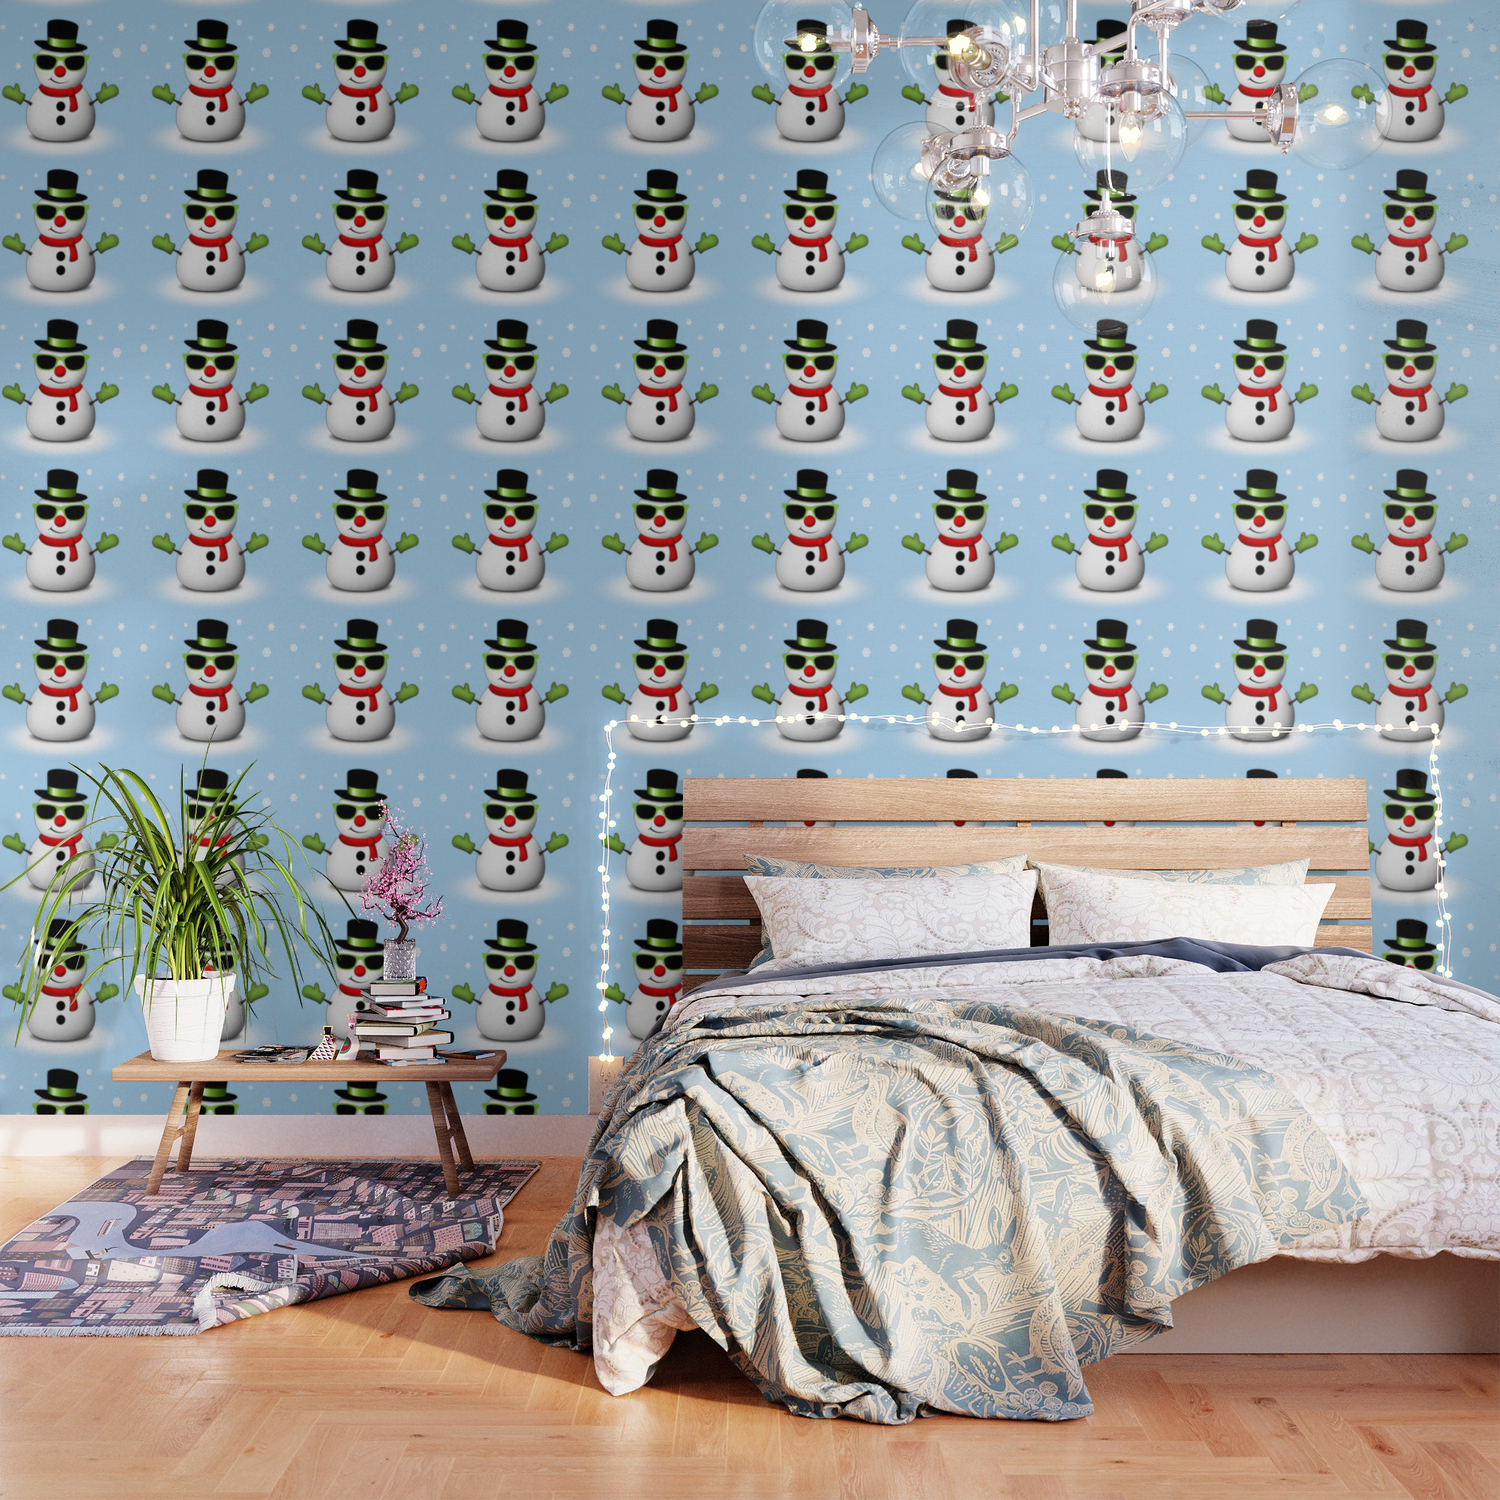 Cool Snowman With Shades And Adorable Smirk Wallpaper By Pldesign